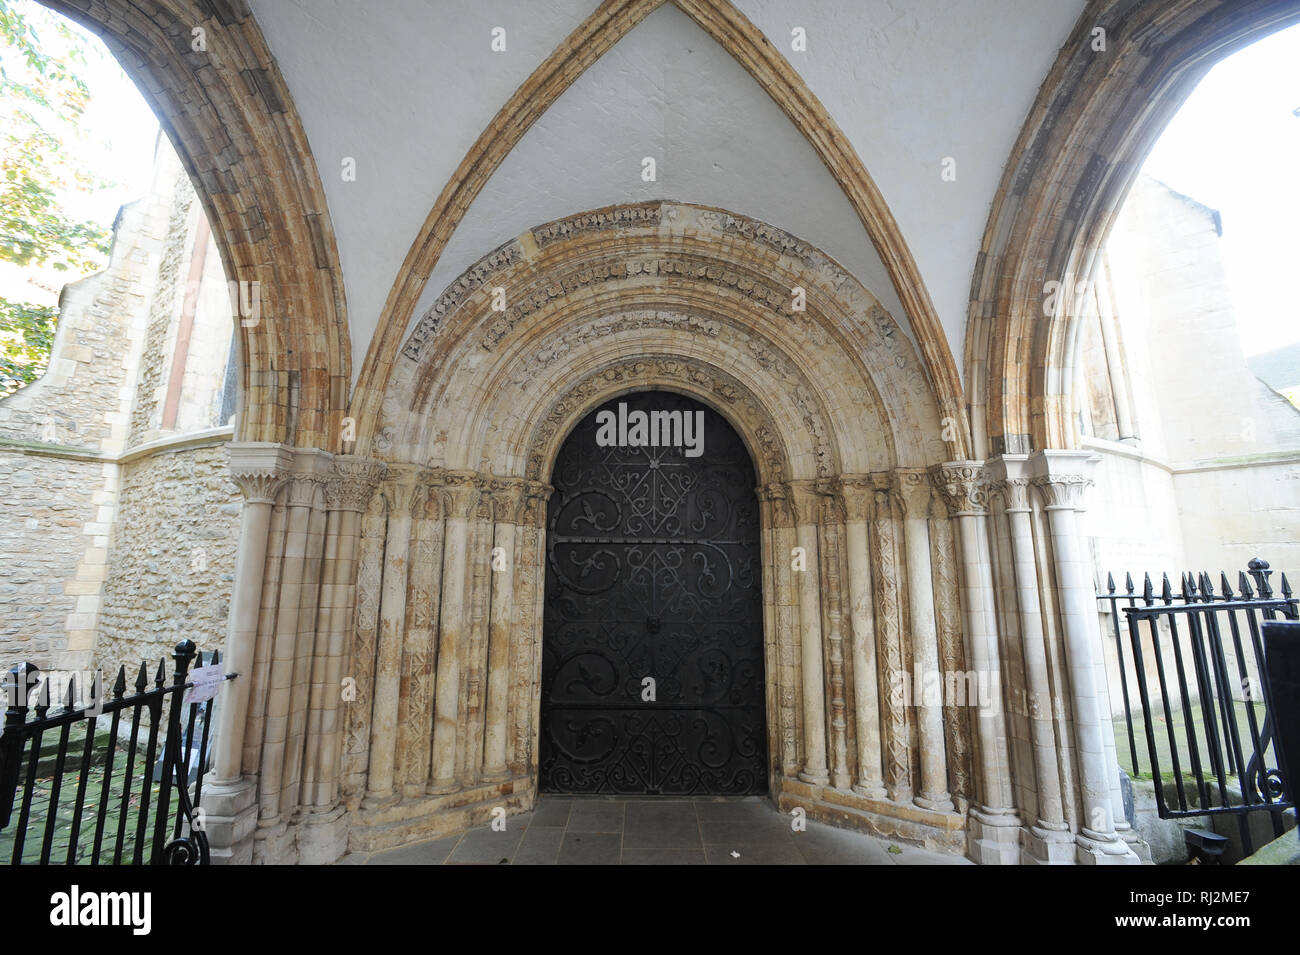 Romanesque Temple Church built 1185 by Knight Templars in London, England, Great Britain. October 24th 2008 © Wojciech Strozyk / Alamy Stock Photo Stock Photo